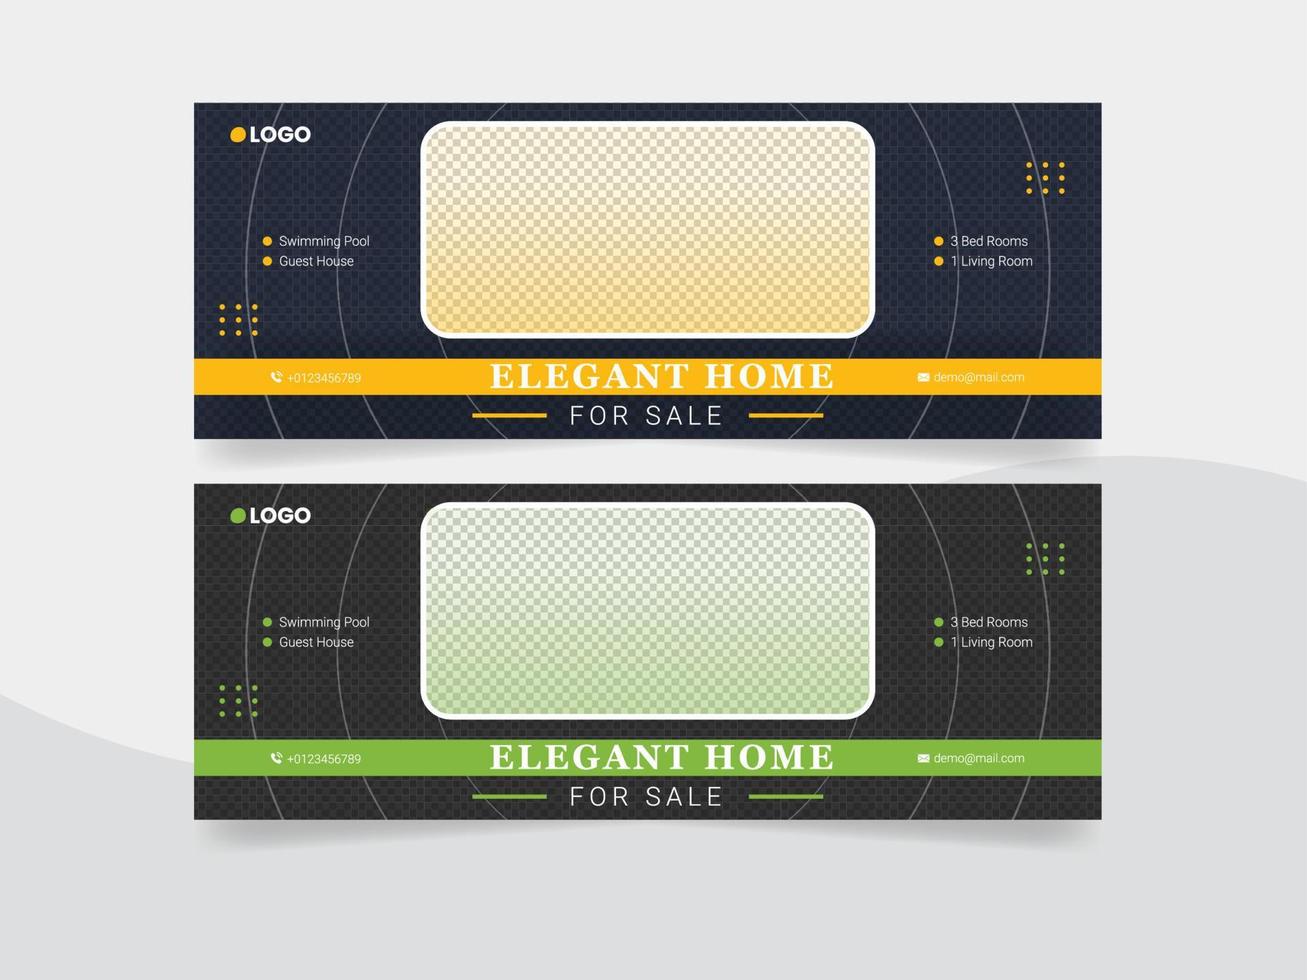 Real estate web banner and social media Facebook cover template vector